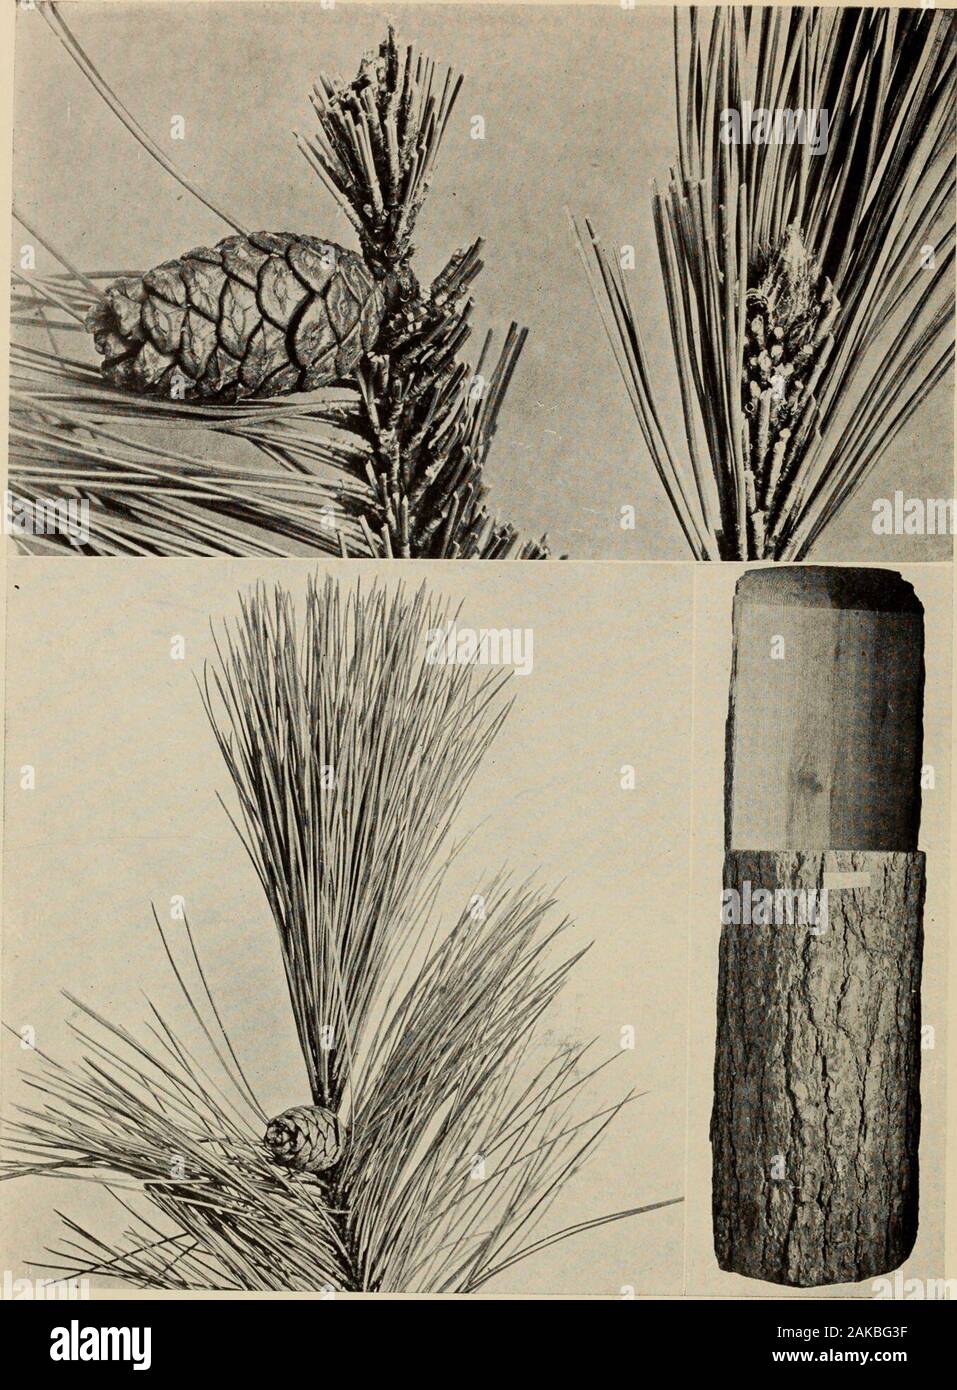 The tree book : A popular guide to a knowledge of the trees of North America and to their uses and cultivation . THE RED OR NORWAY PINE {Pinus resinosa) The leaves are slender and long, dark green and lustrous, in zs, rising out of long sheaths. The cones have thick, woody scales,destitute of prickles. The pale-red wood is used for masts and bridge timbers The Pines and fungous injuries. Lumber used in heavy construction; forbridges, piles, docks, buildings, masts and spars. The red pine is the only American member of a group of Old-World pines of which P. sylvestris, the Scotch pine of Europe Stock Photo